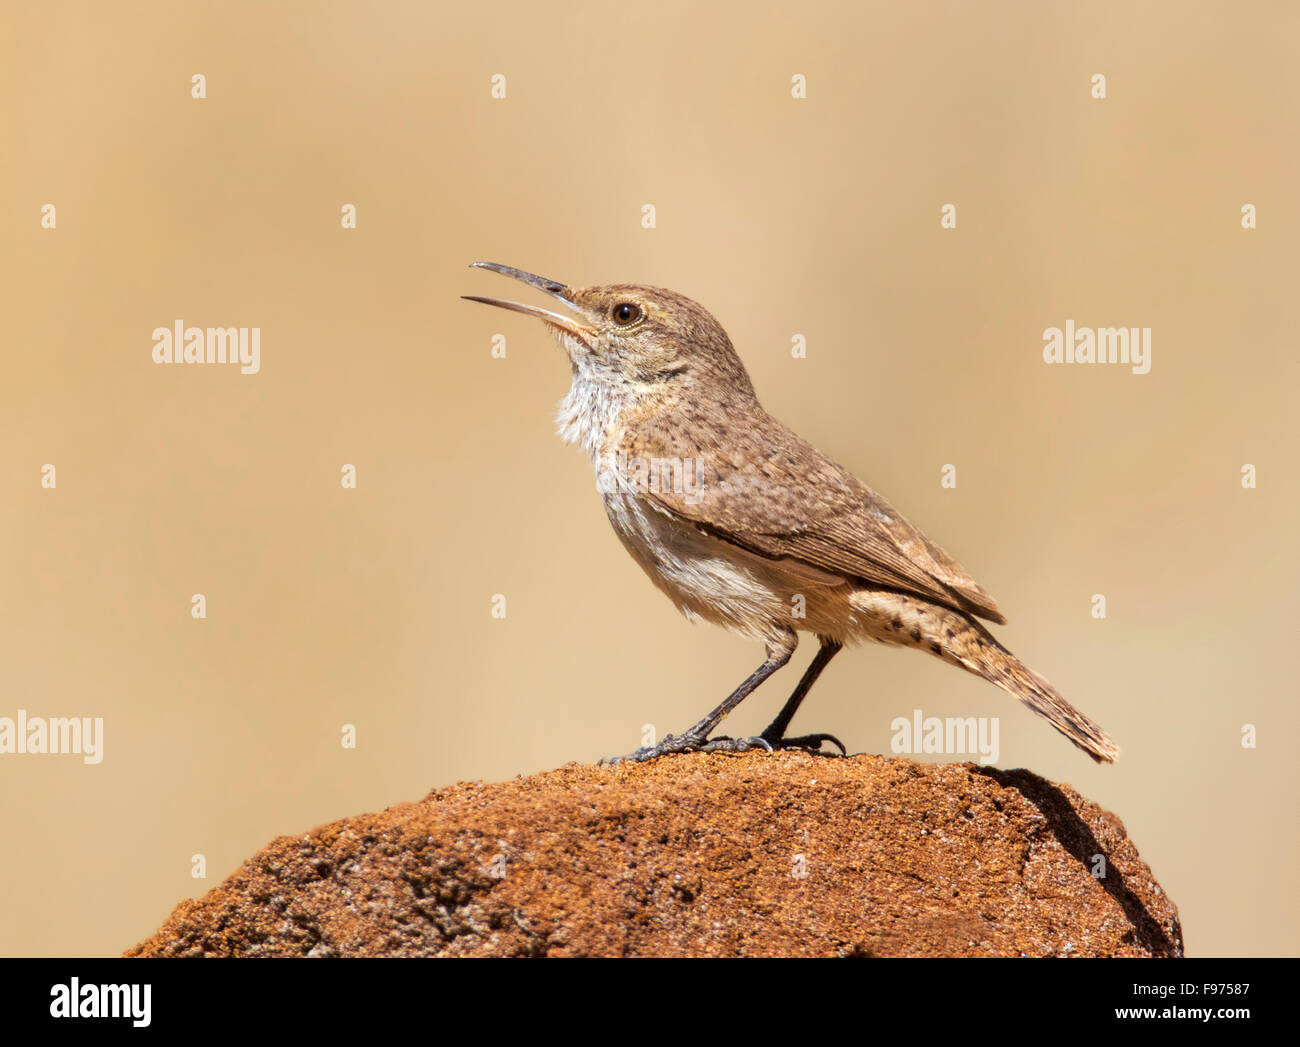 A Rock Wren (Salpinctes obsoletus) perched on a rock in the badlands of North Dakota. Stock Photo